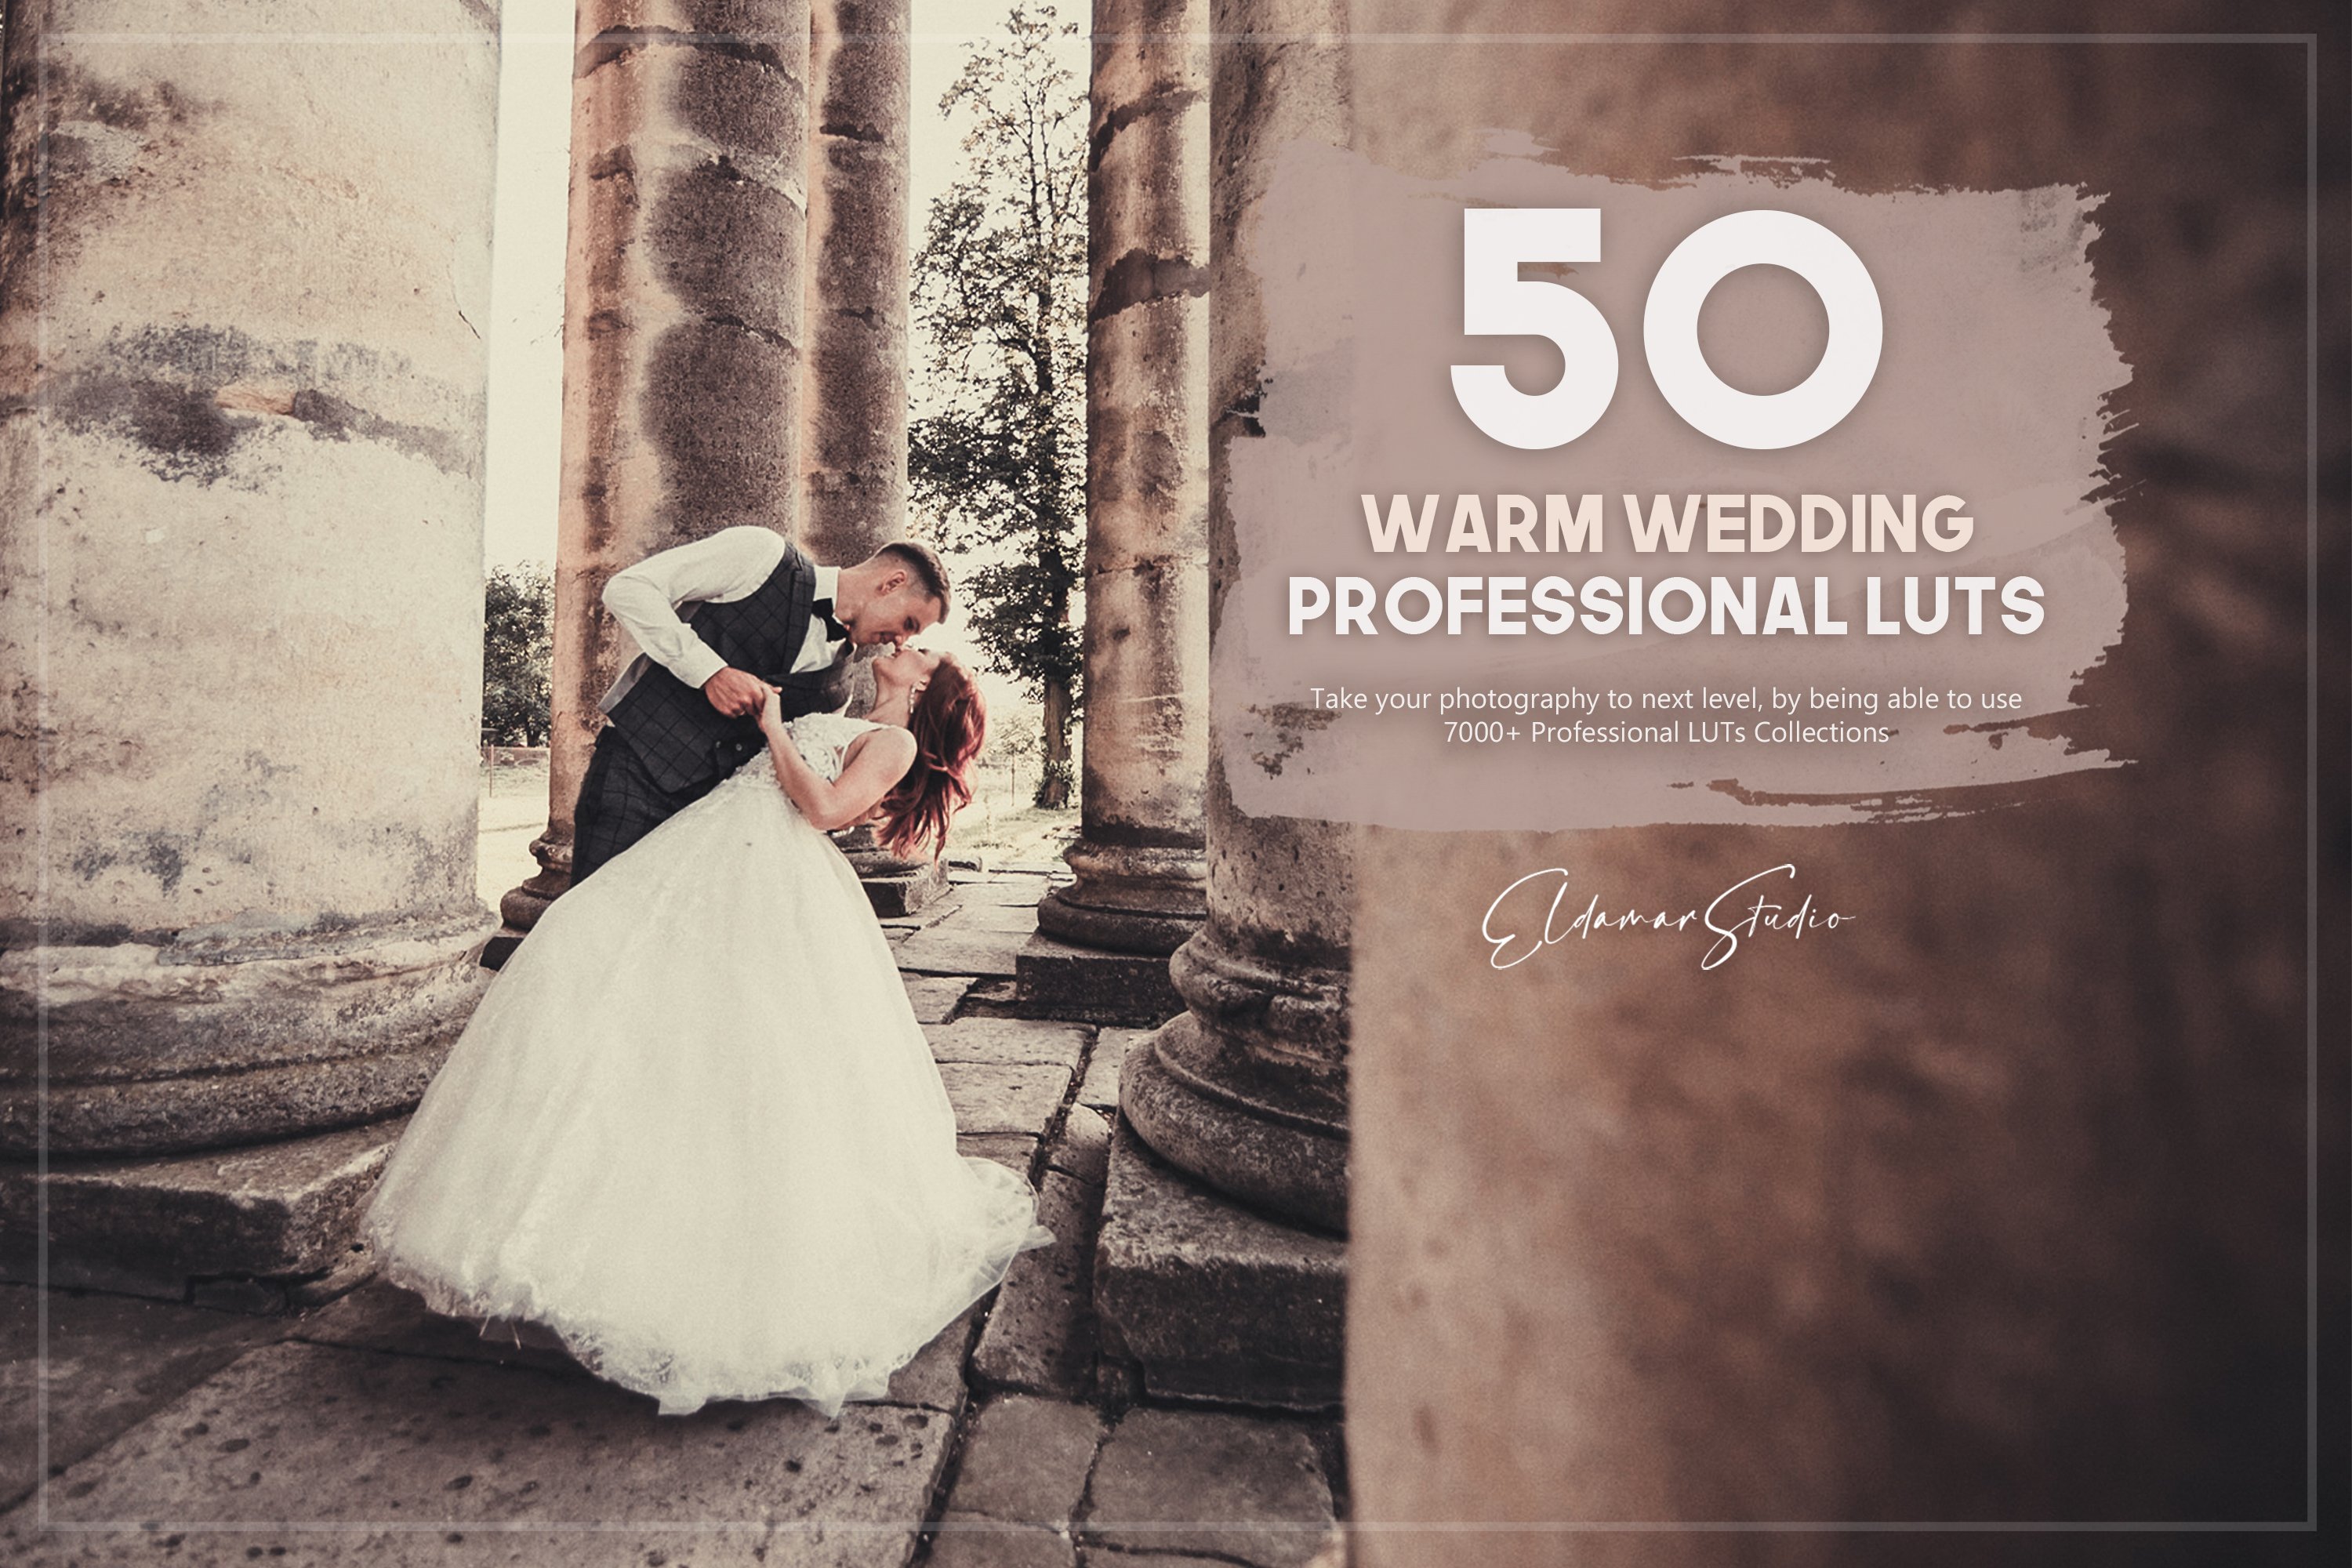 50 Warm Wedding LUTs Packcover image.